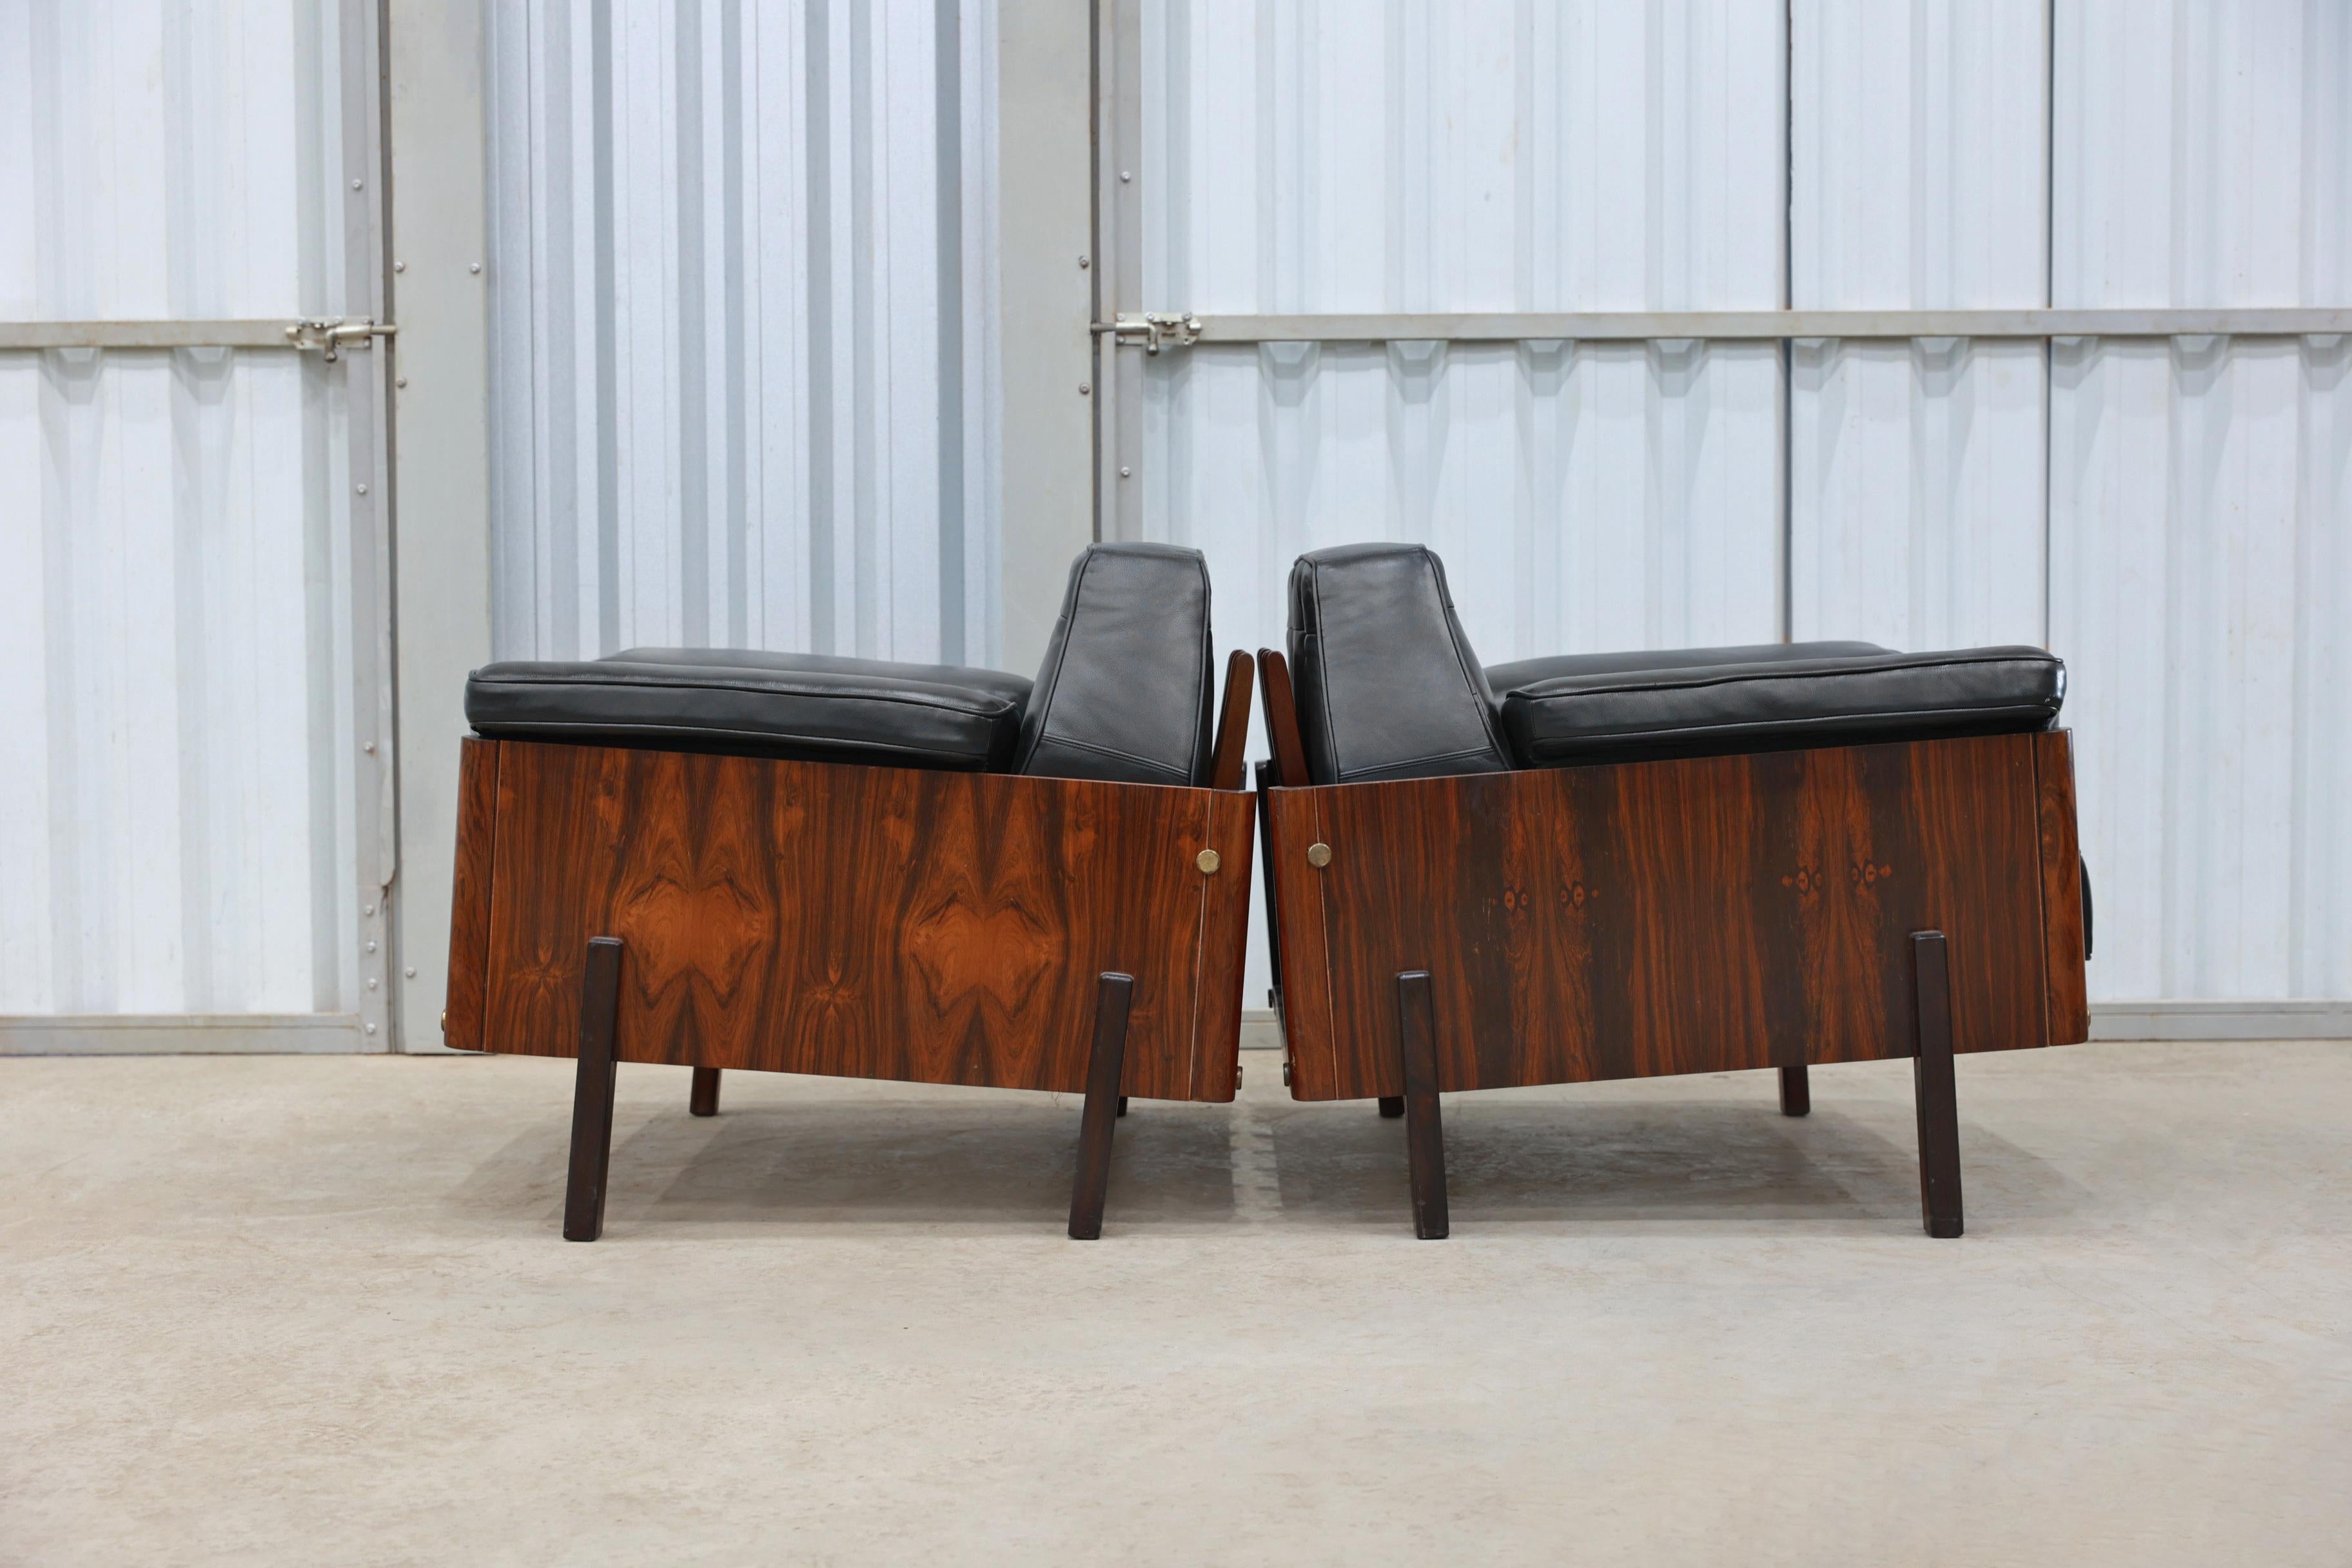 Woodwork Mid-Century Modern Armchairs in Rosewood & Black Leather by Bertomeu, Brazil For Sale